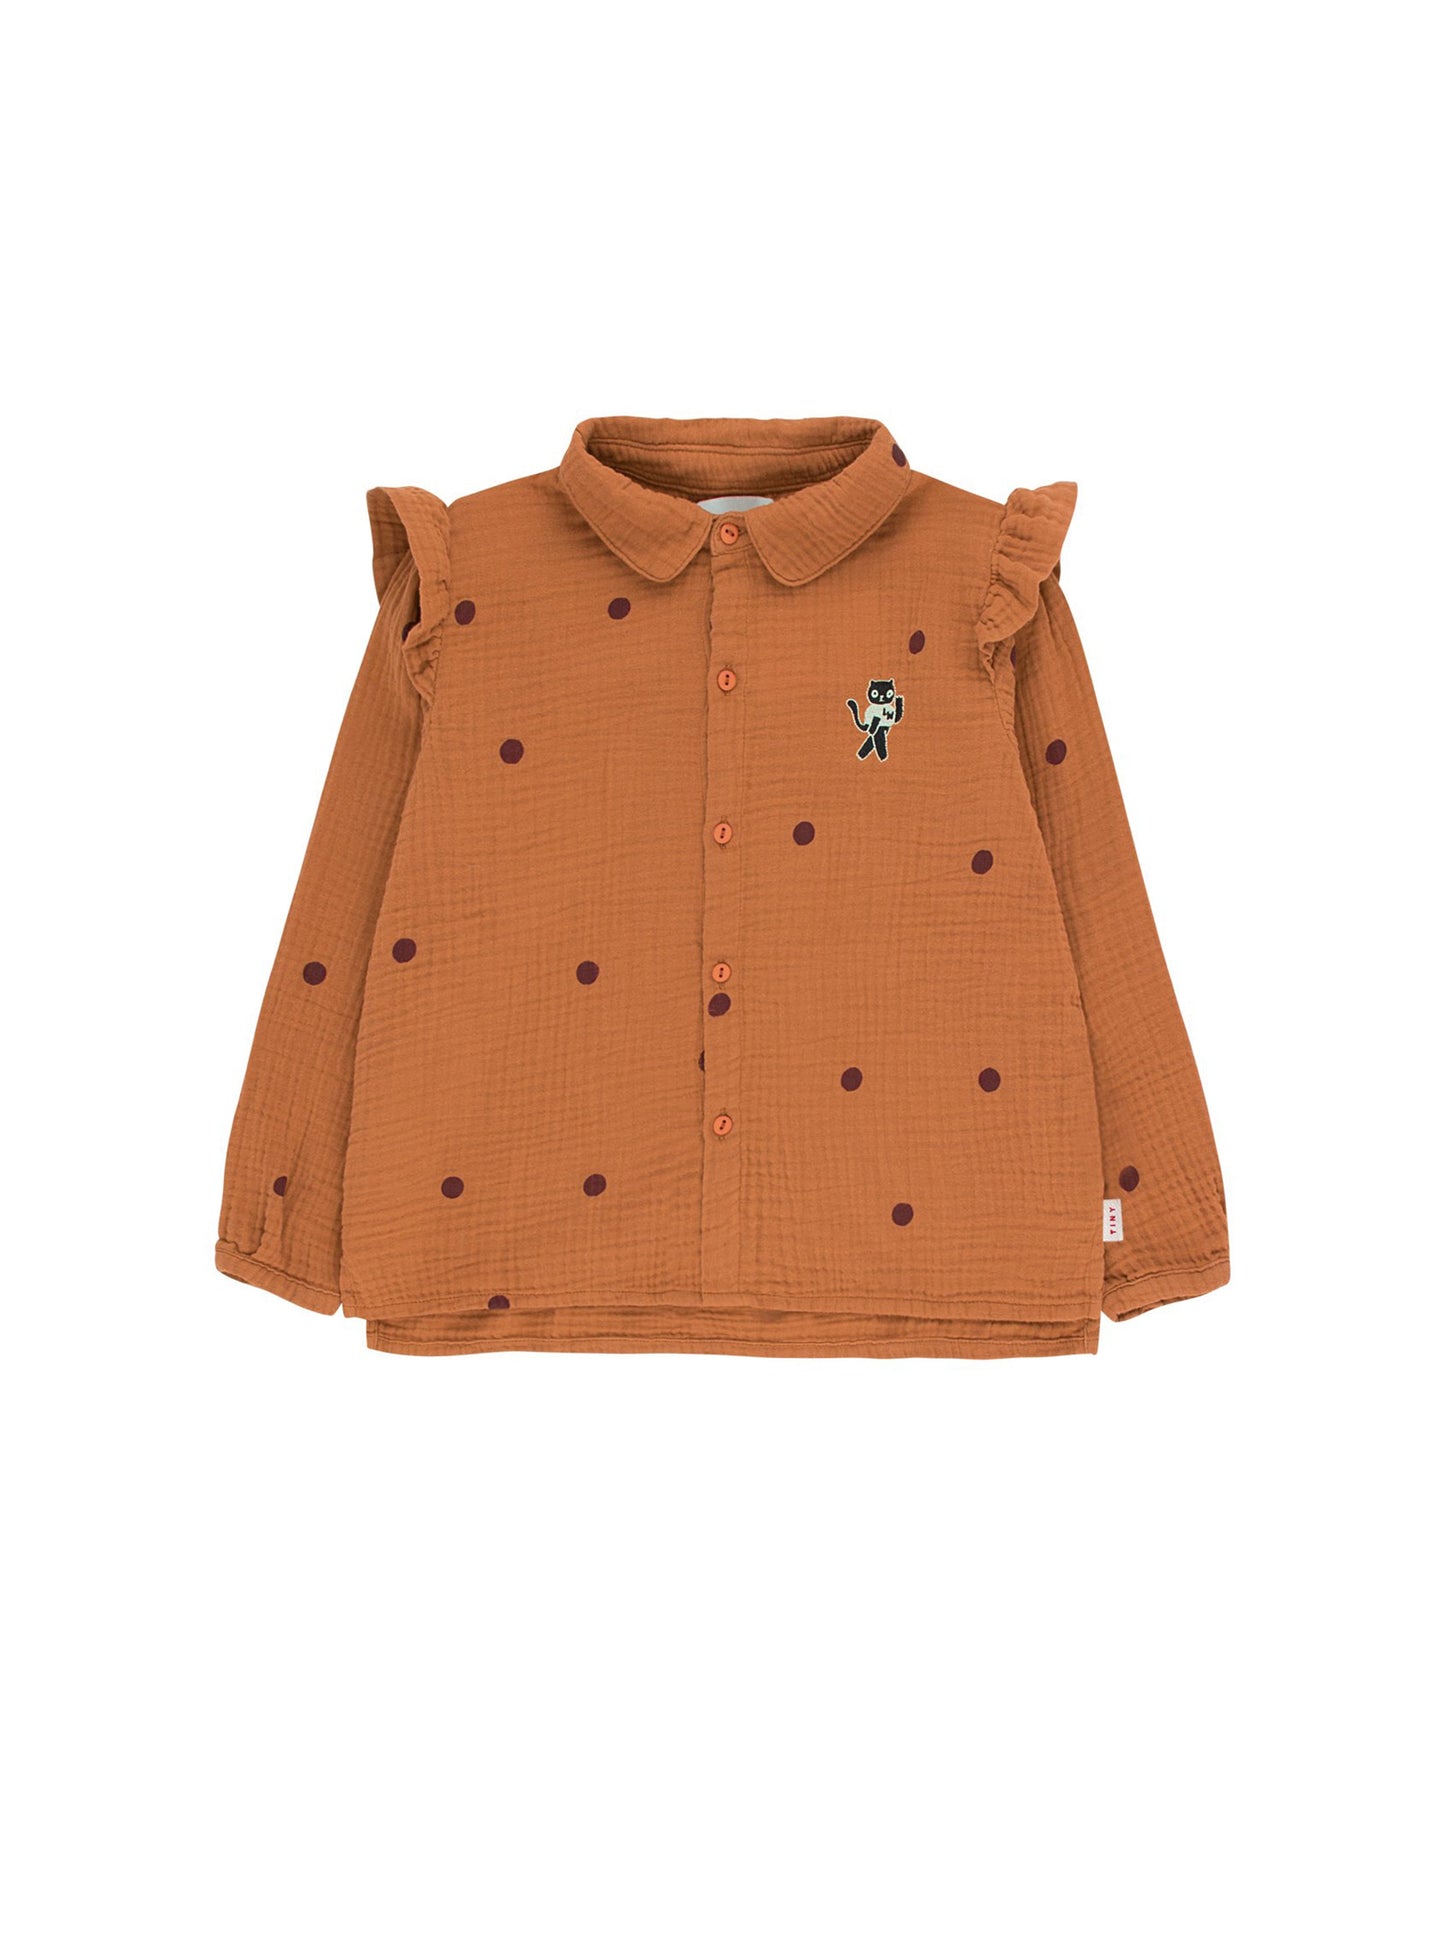 [6y] TINYCOTTONS Dots "CAT" Shirt in Brown/Aubergine